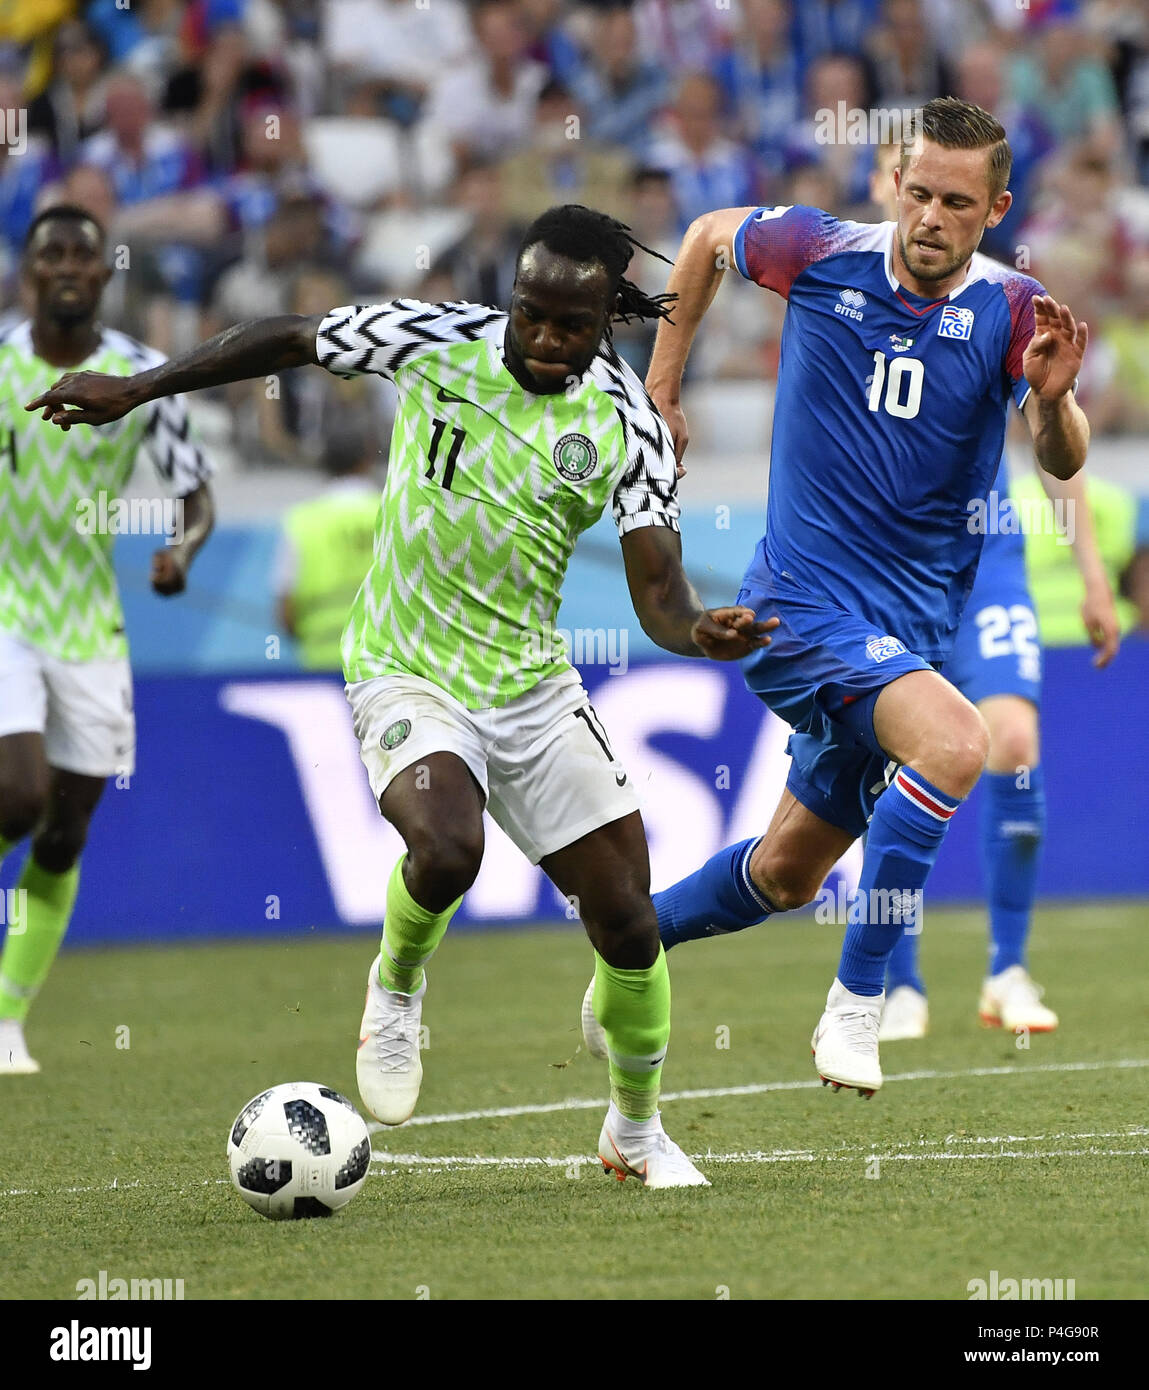 Volgograd, Russia. 22nd June, 2018. Victor Moses (C) of Nigeria vies with Gylfi Sigurdsson (R) of Iceland during the 2018 FIFA World Cup Group D match between Nigeria and Iceland in Volgograd, Russia, June 22, 2018. Credit: He Canling/Xinhua/Alamy Live News Stock Photo